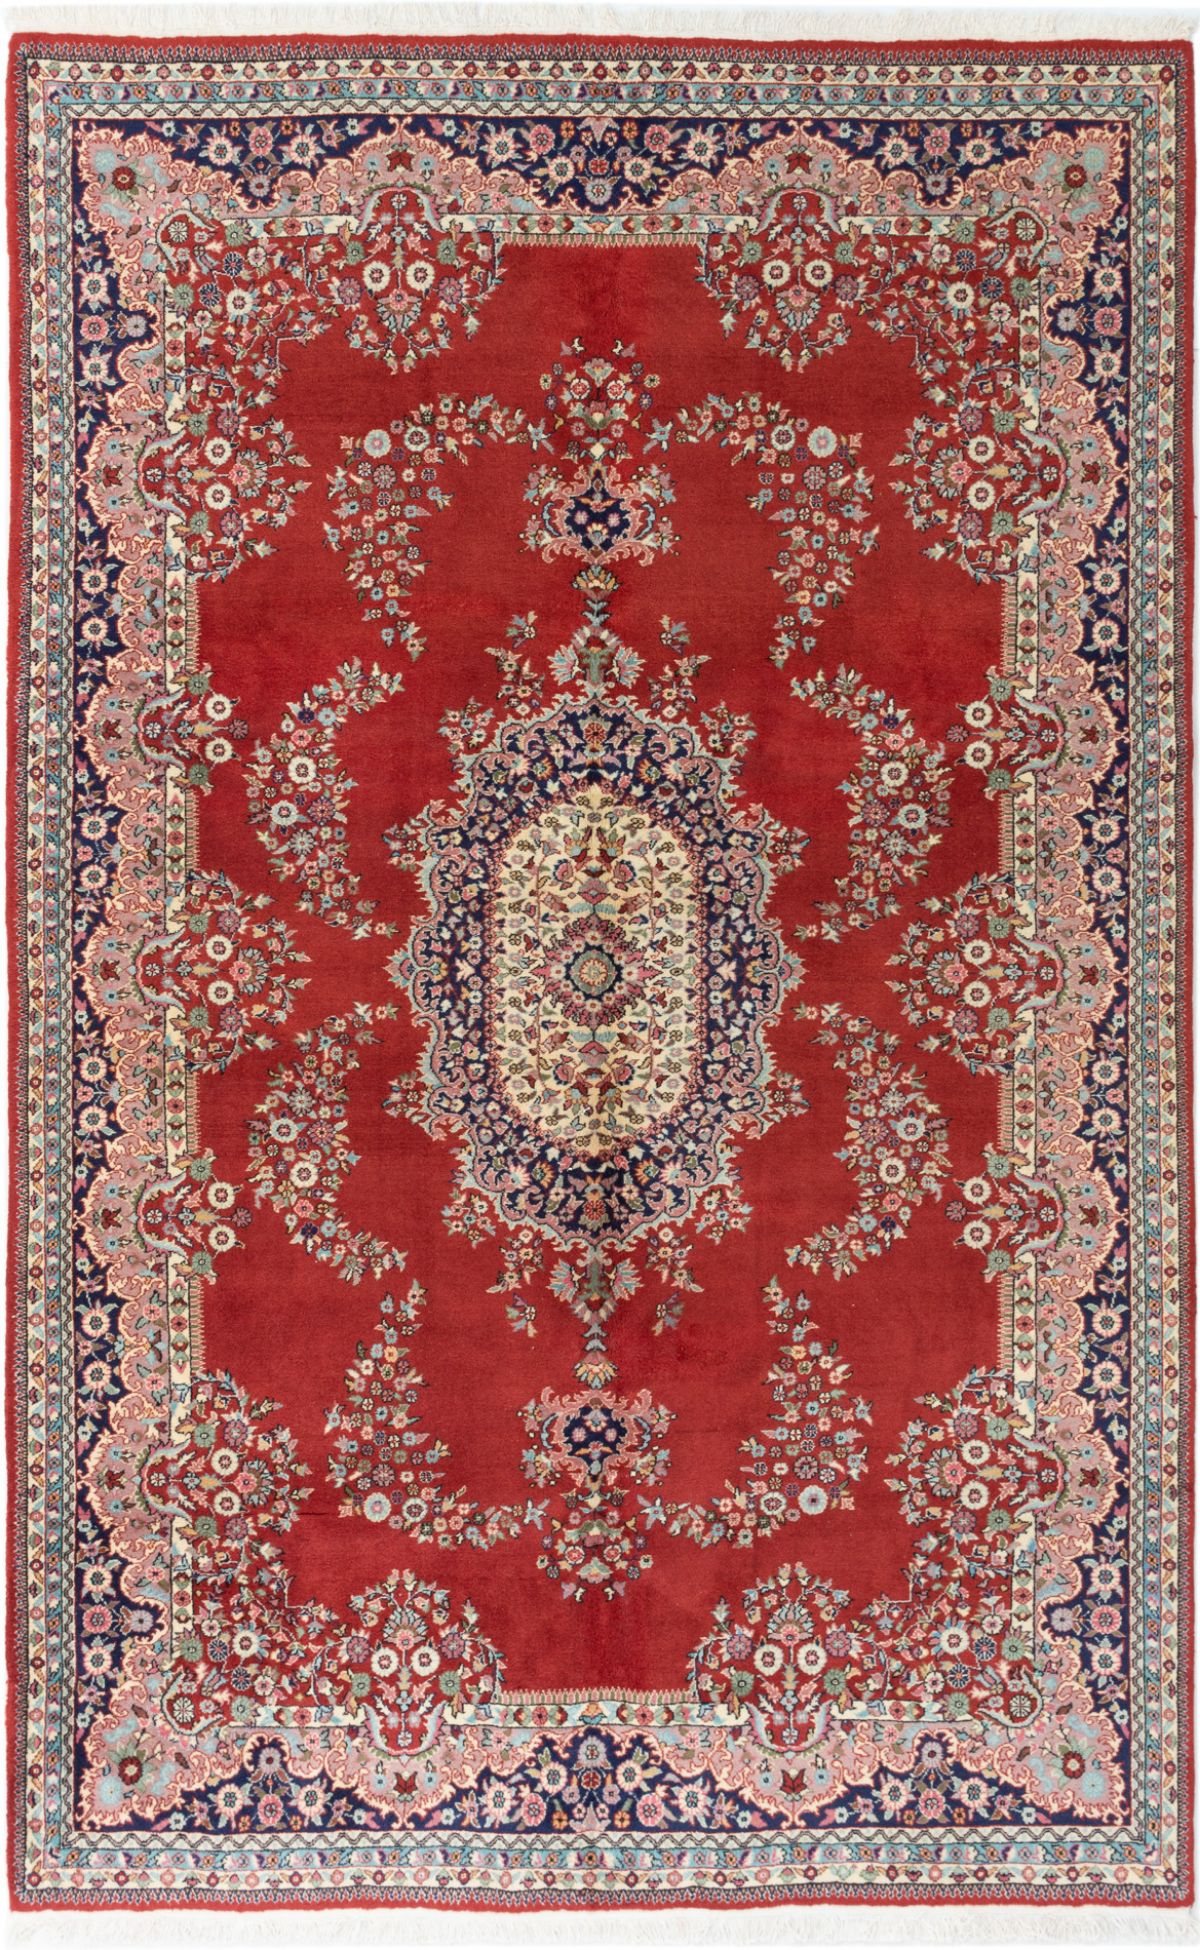 Hand-knotted Anatolian Red Wool Rug 6'7" x 10'6" Size: 6'7" x 10'6"  